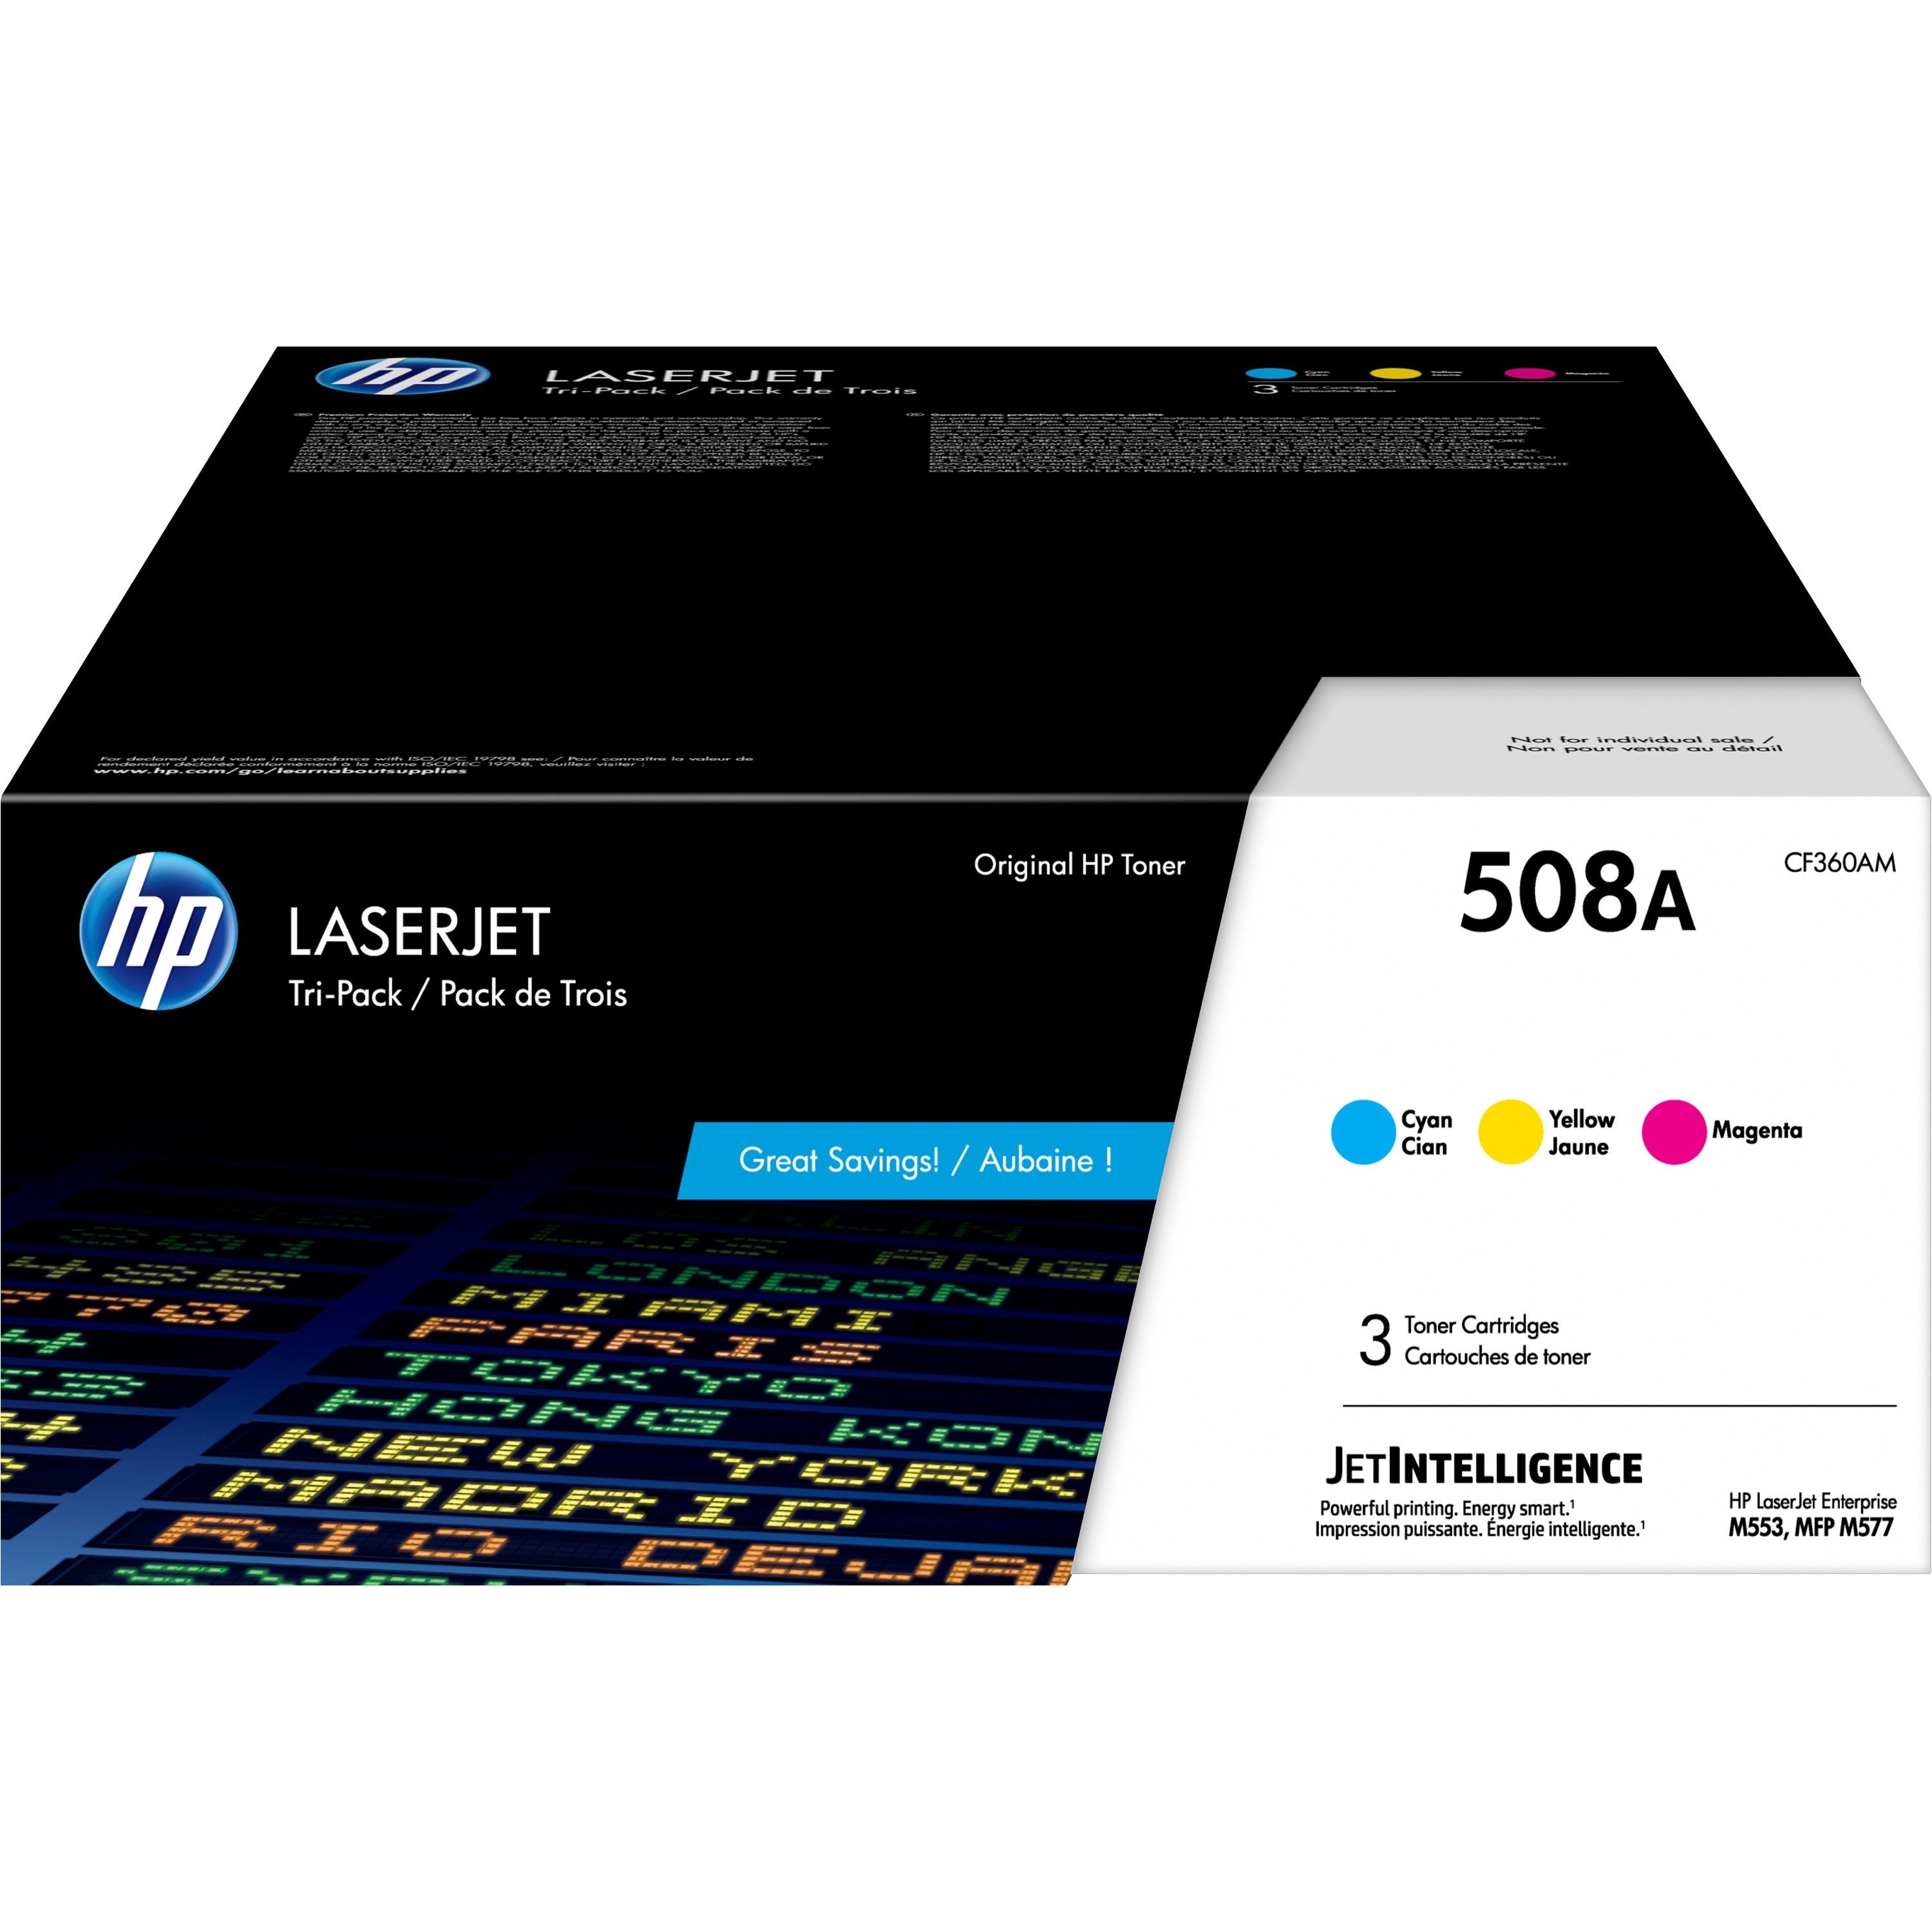 hp-508a-original-laser-toner-cartridge-cyan-magenta-yellow-3-pack-5000-pages-cyan-5000-pages-magenta-5000-pages-yellow_hewcf360am - 1